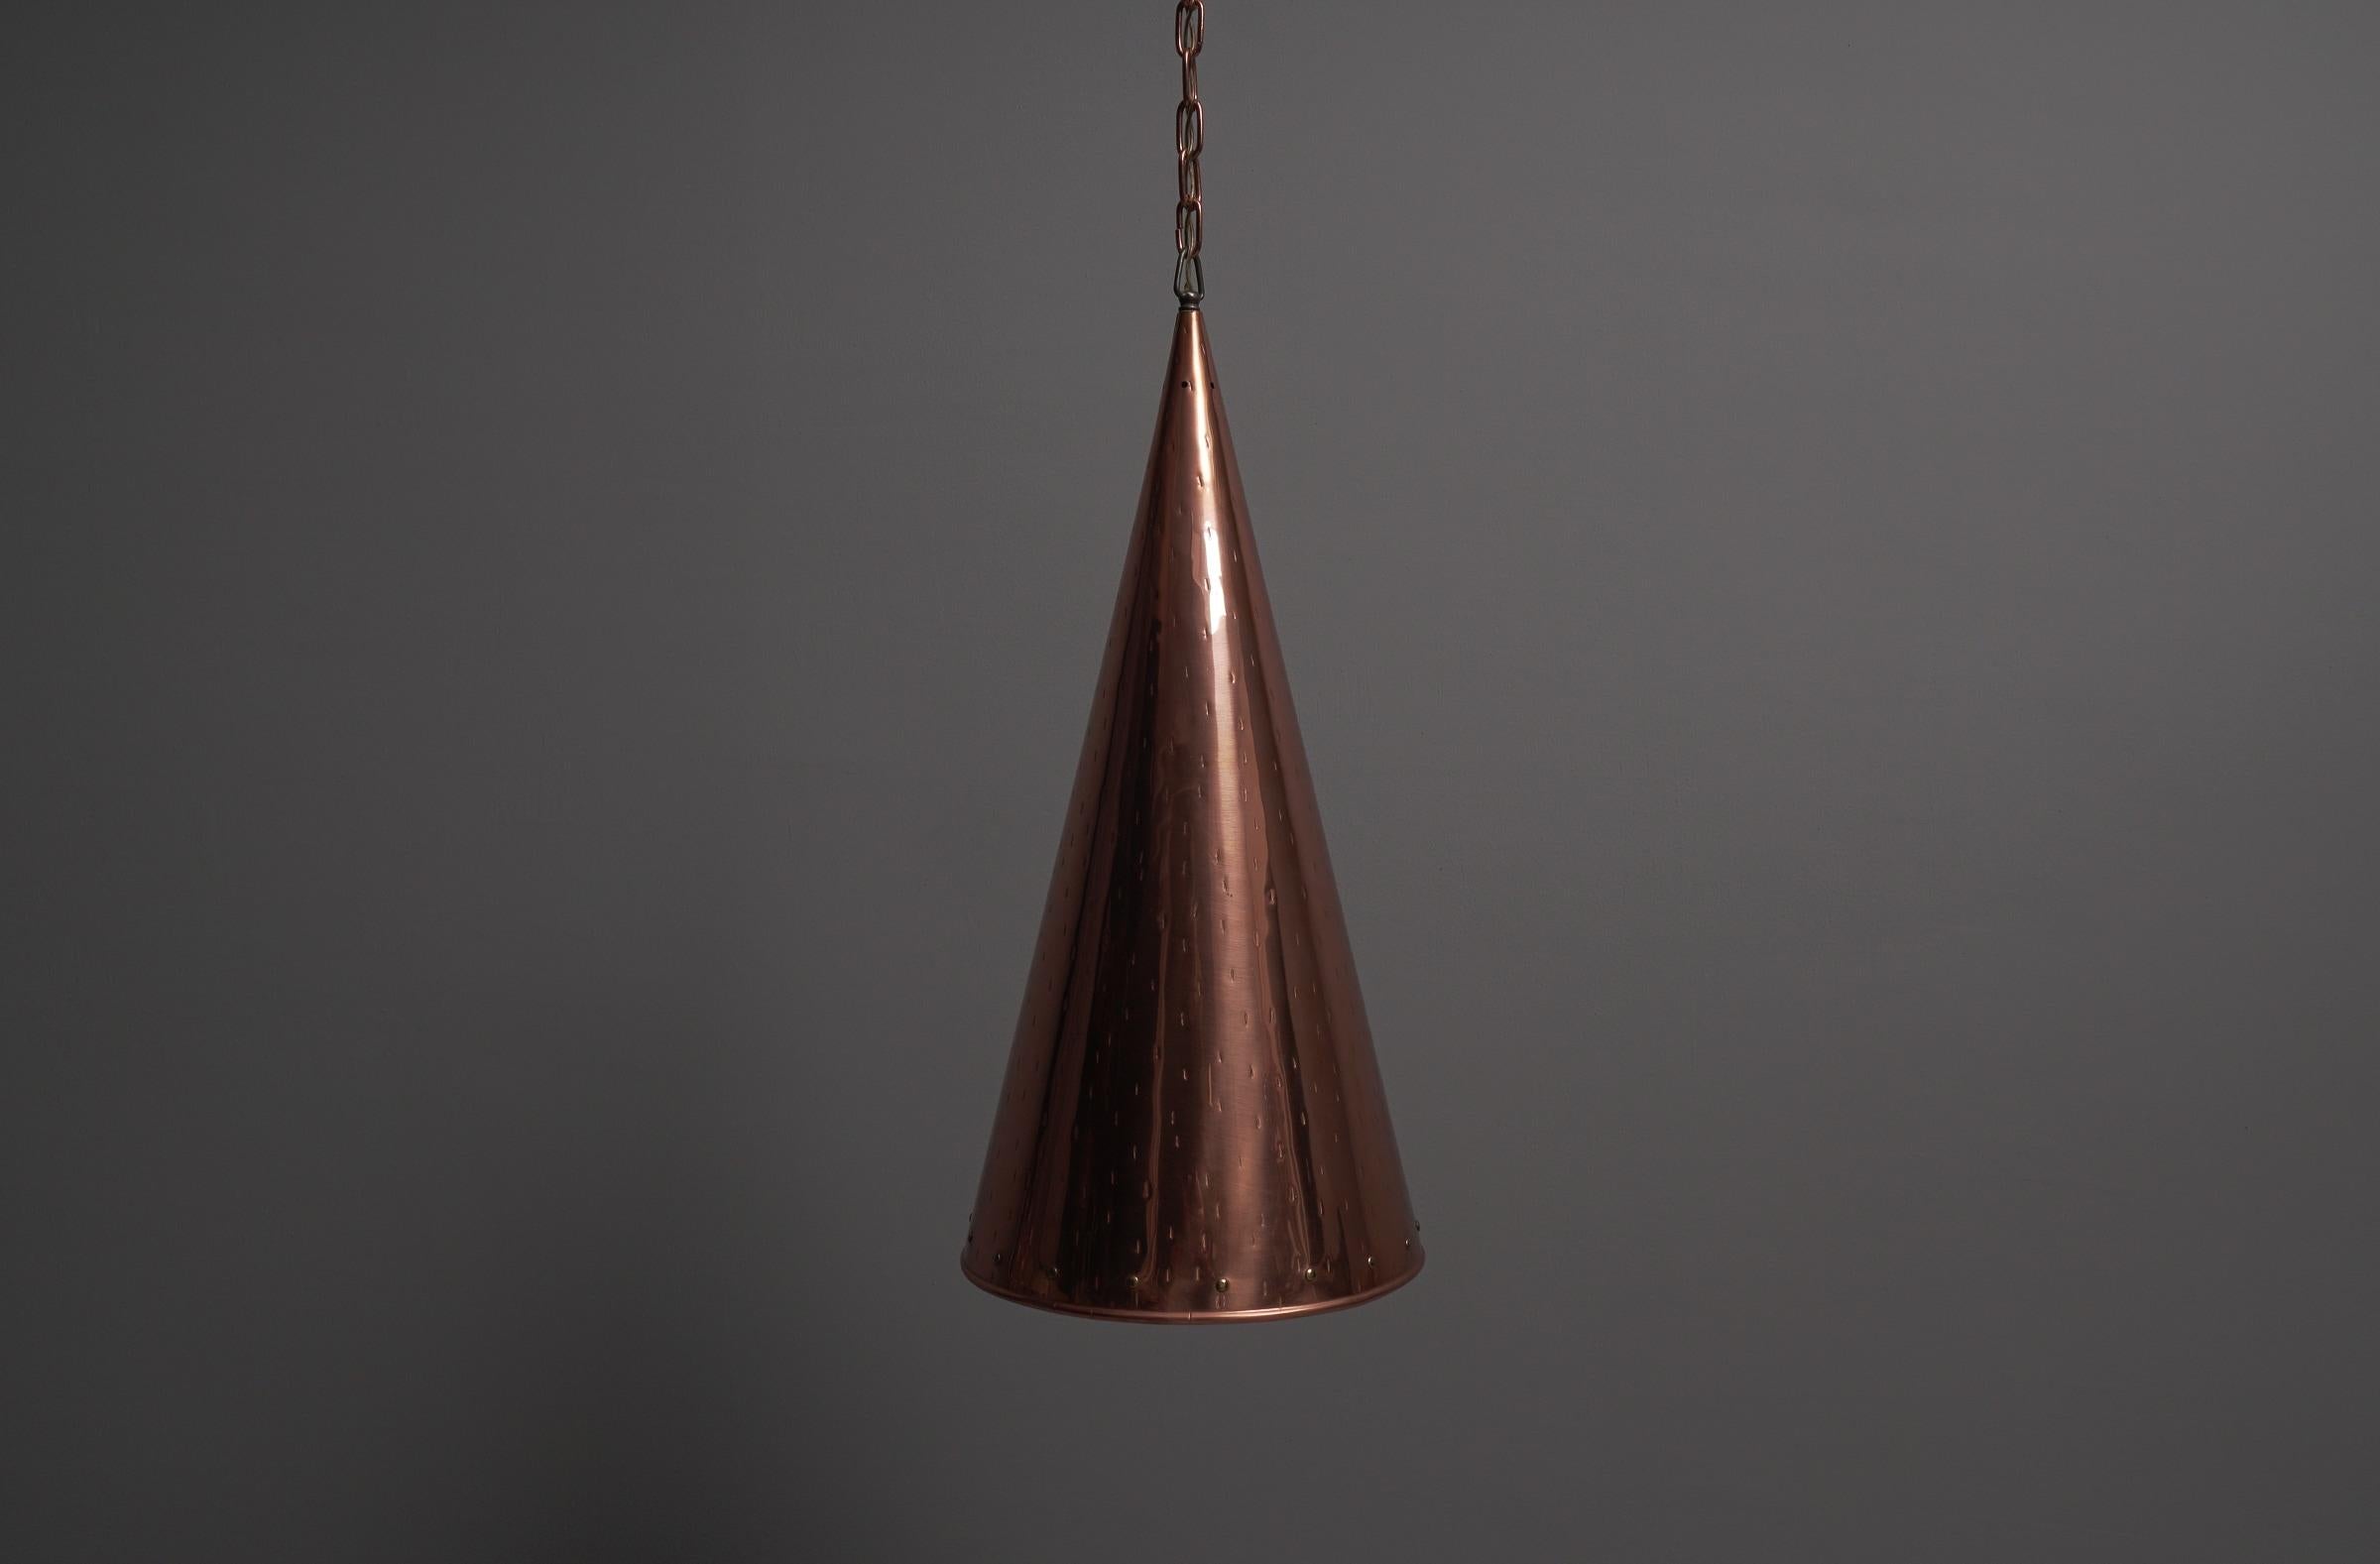 Hammered Copper Cone Pendant Lamps by E.S Horn Aalestrup, 1950s Denmark For Sale 4